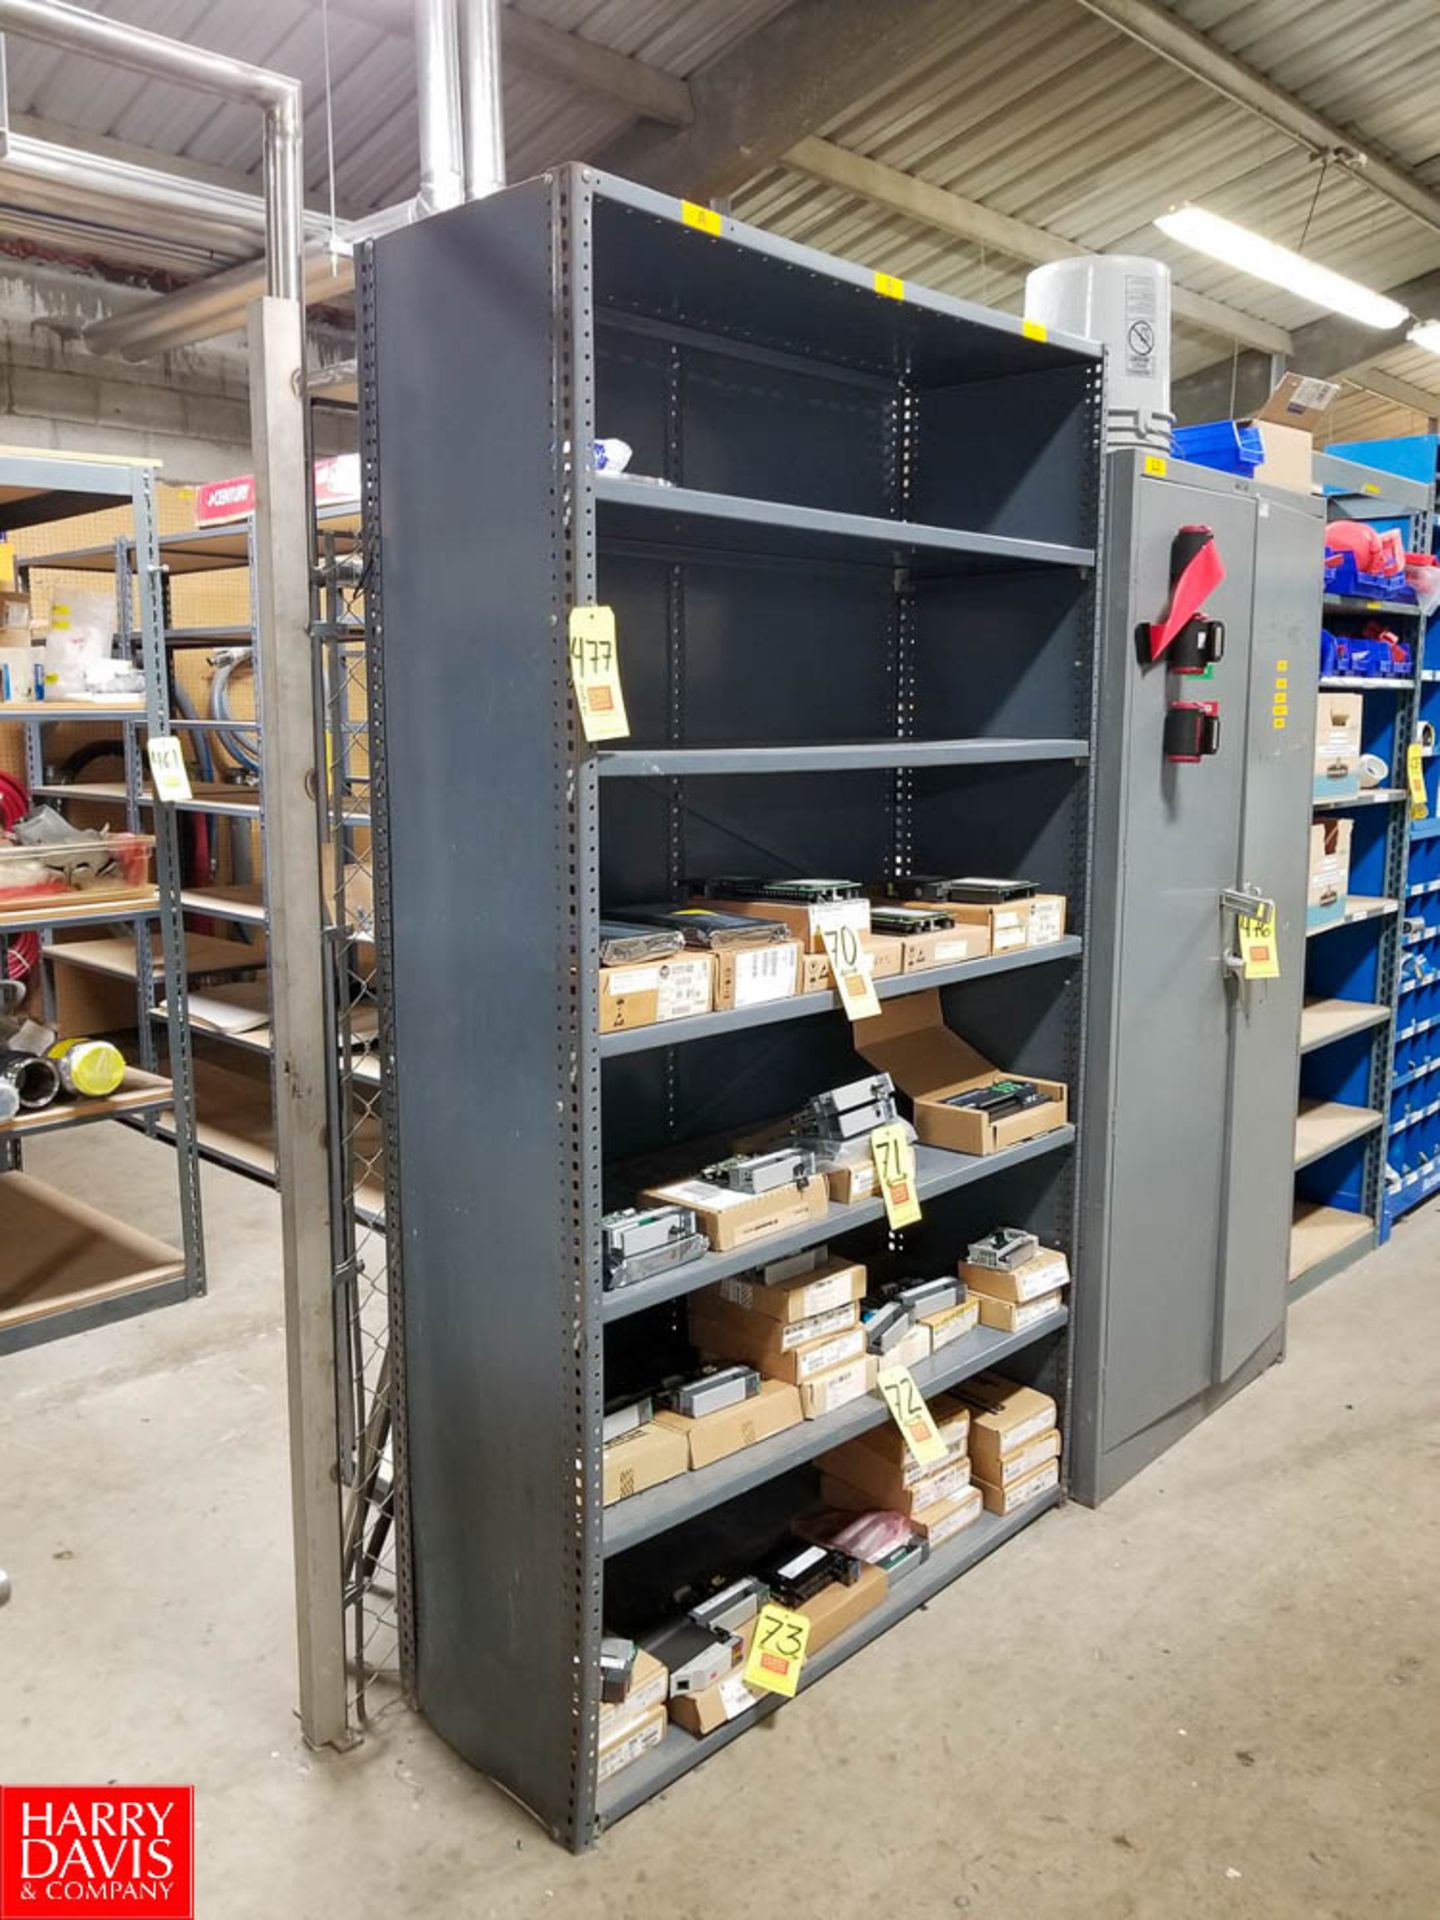 Adjustable Shelving Unit **Contents Not Included - Rigging Fee: $50